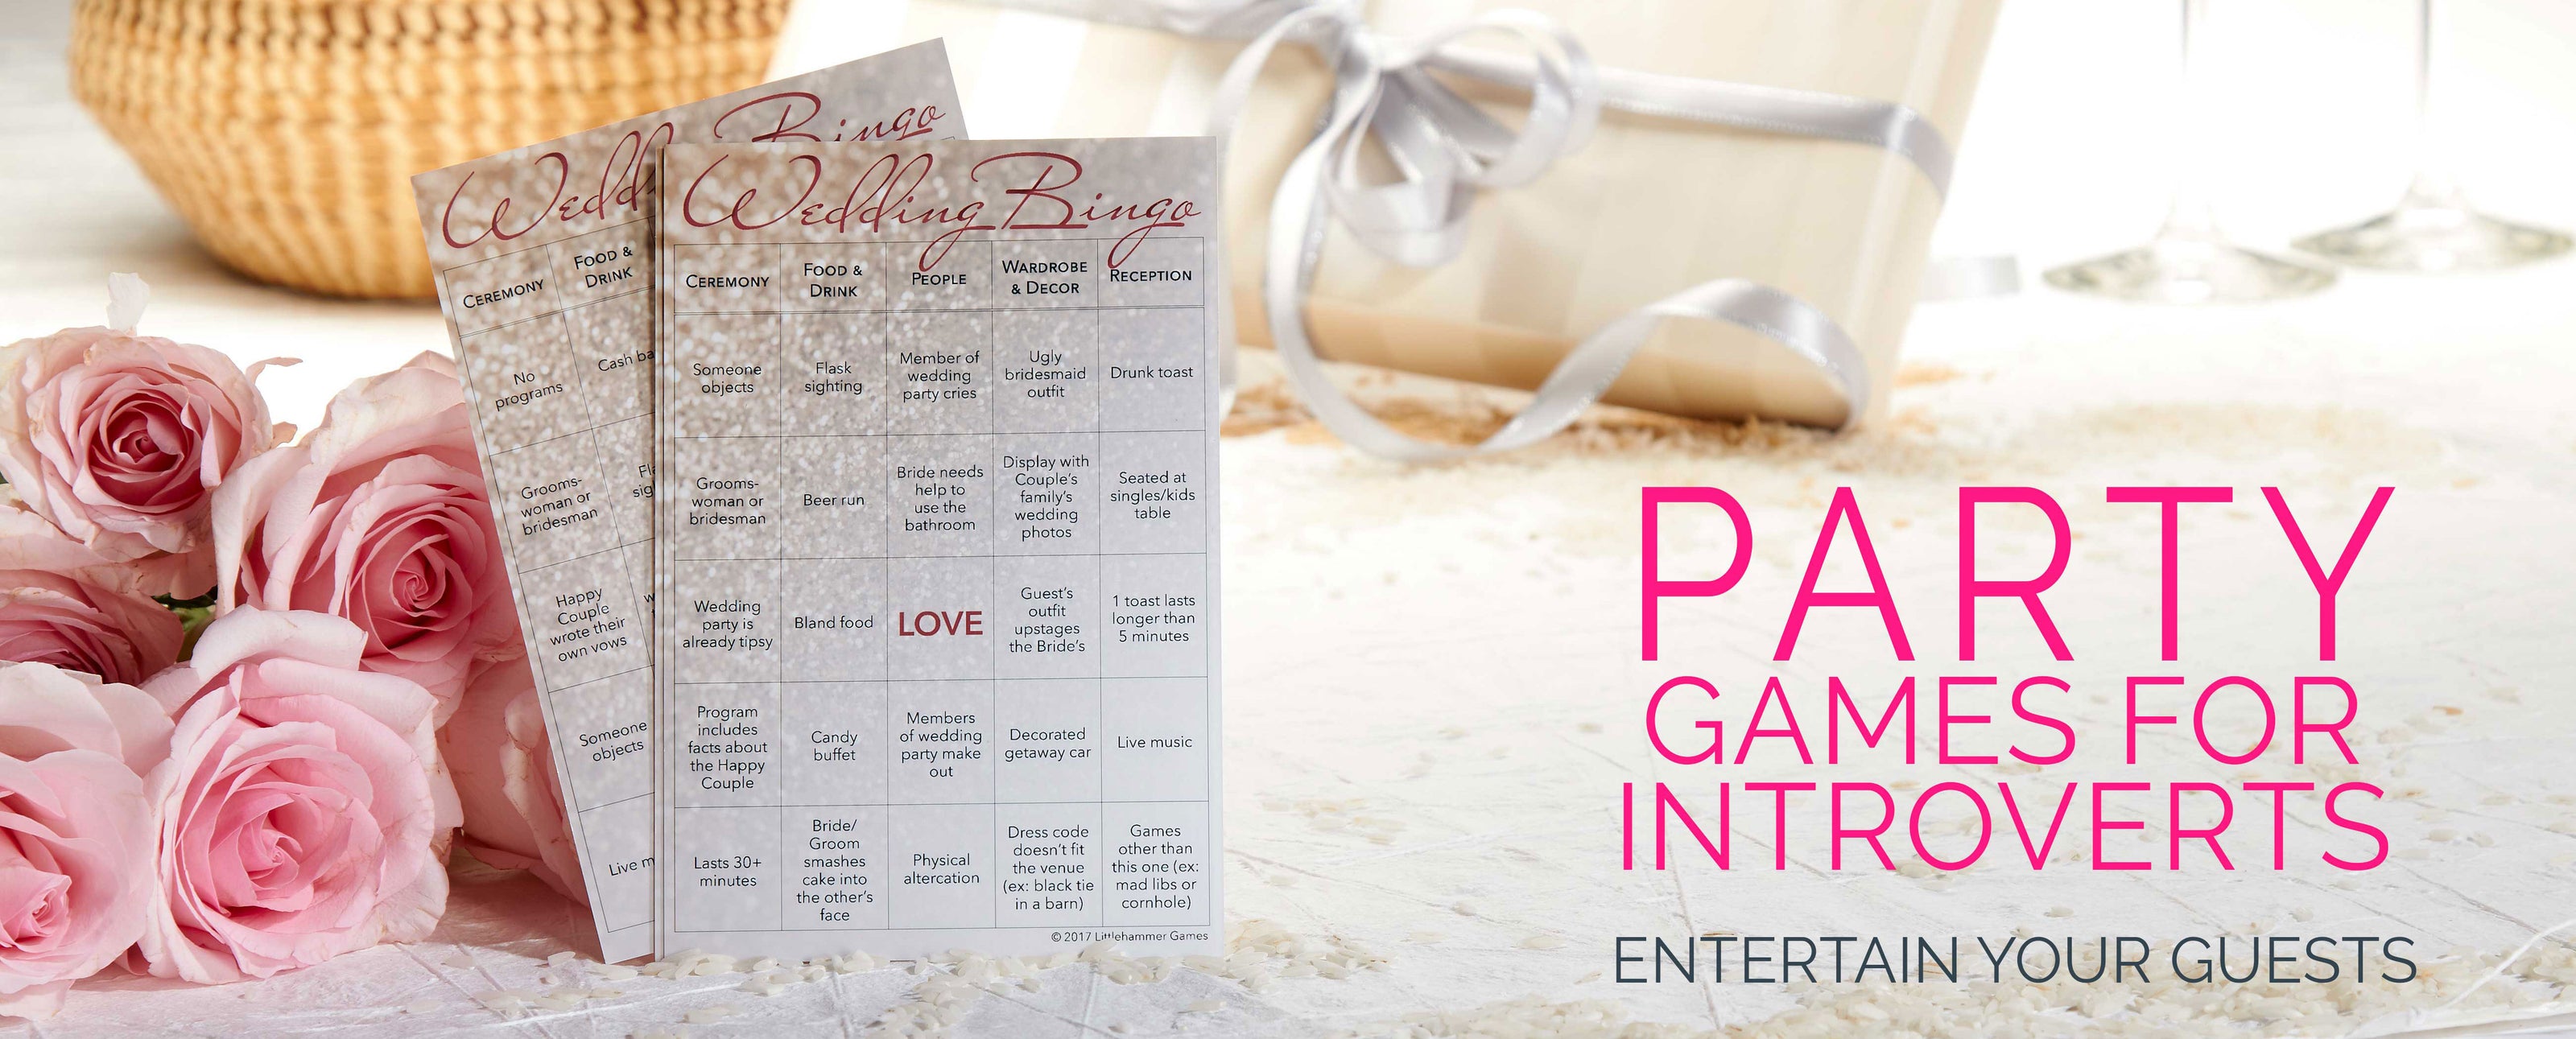 2 glittery rose gold Wedding Bingo cards standing up against pink roses with a basket, wrapped gift, and champagne glasses blurred in the background.  Pink and gray text over the image that says "Party games for introverts Entertain your guests"